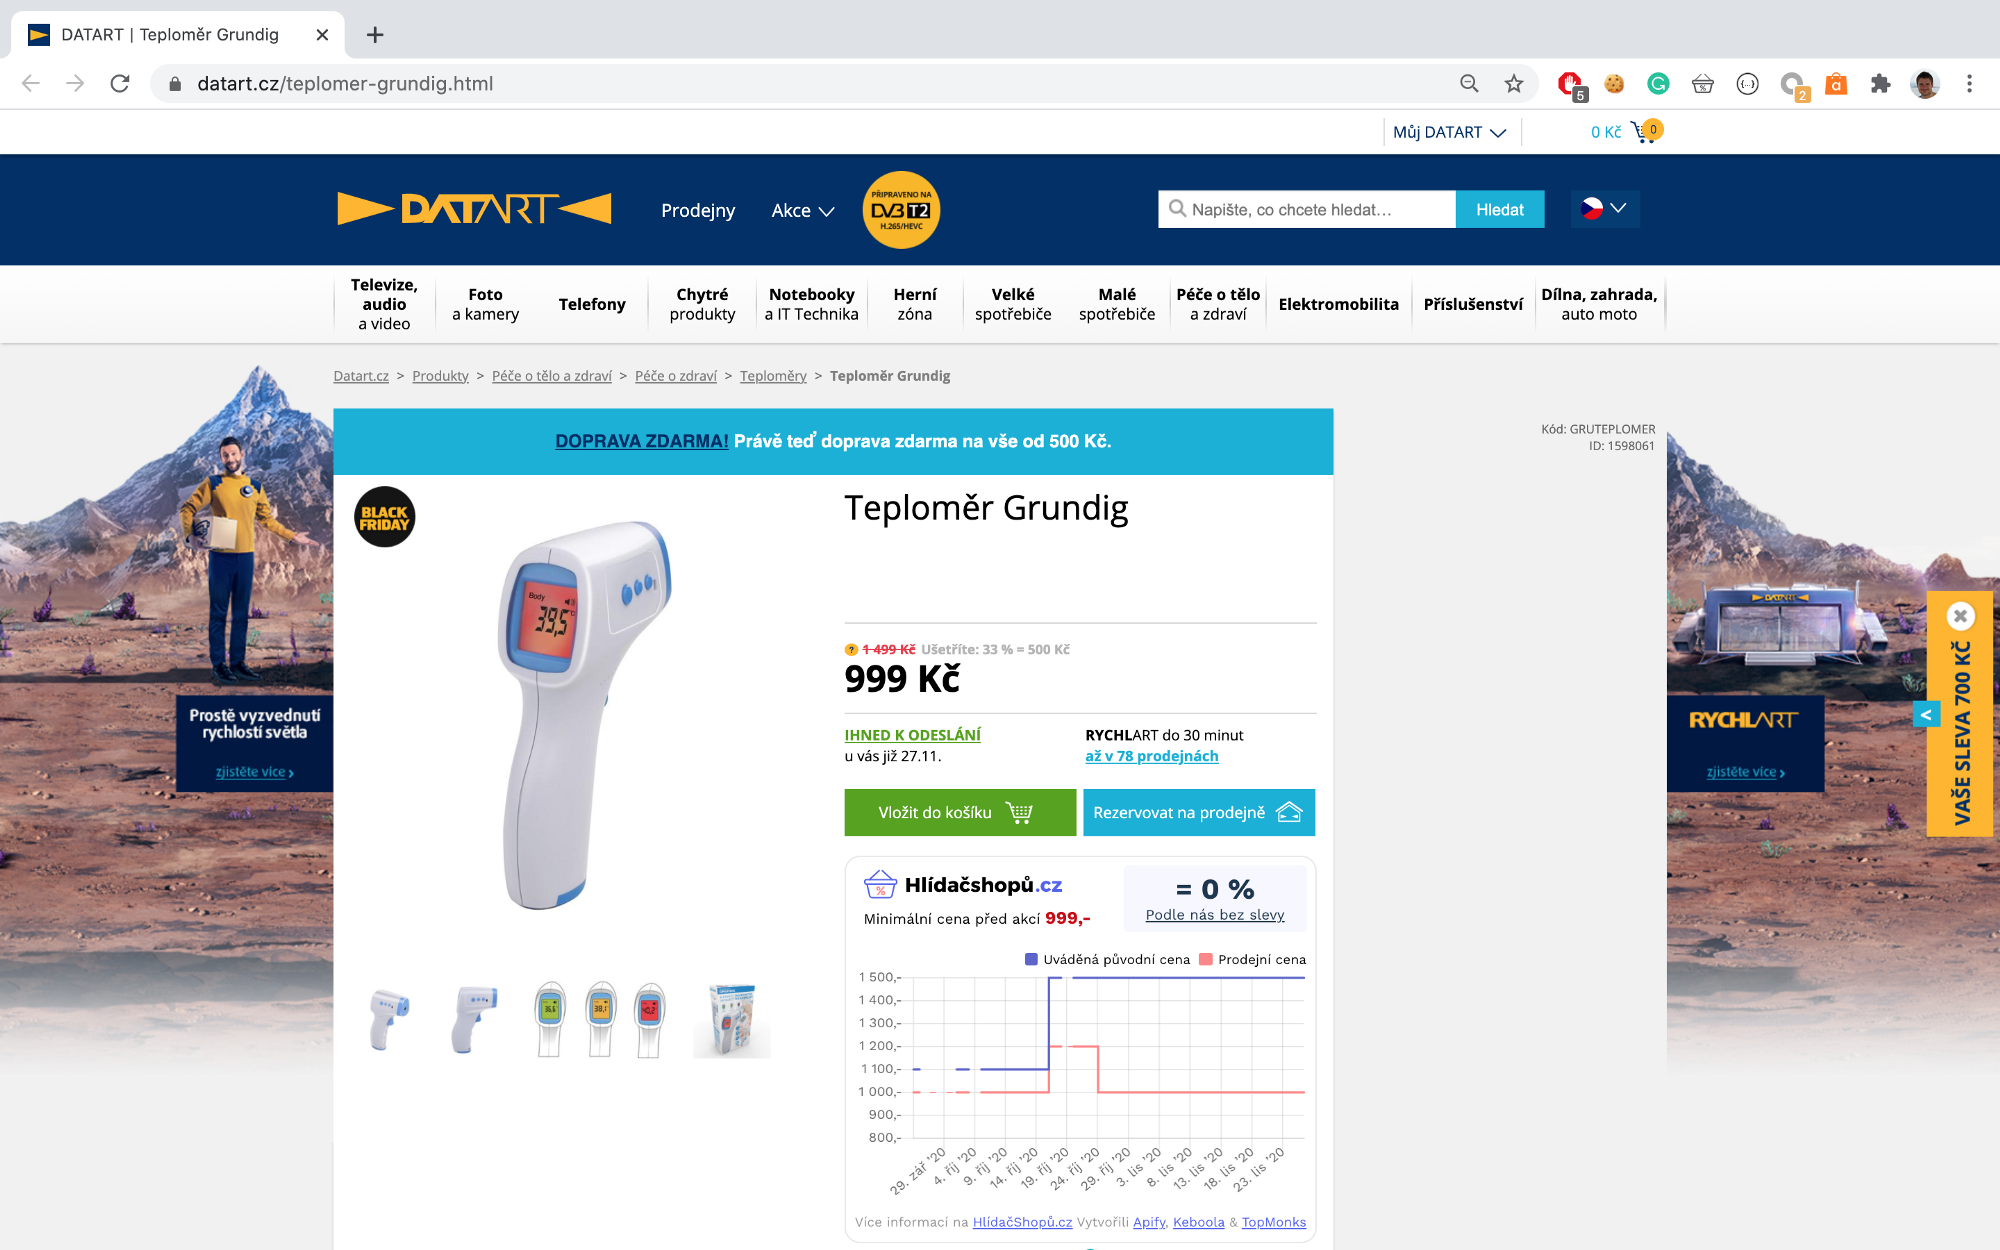 screenshot of a thermometer on sale at datart.cz from 1499 CZK to 999 CZK